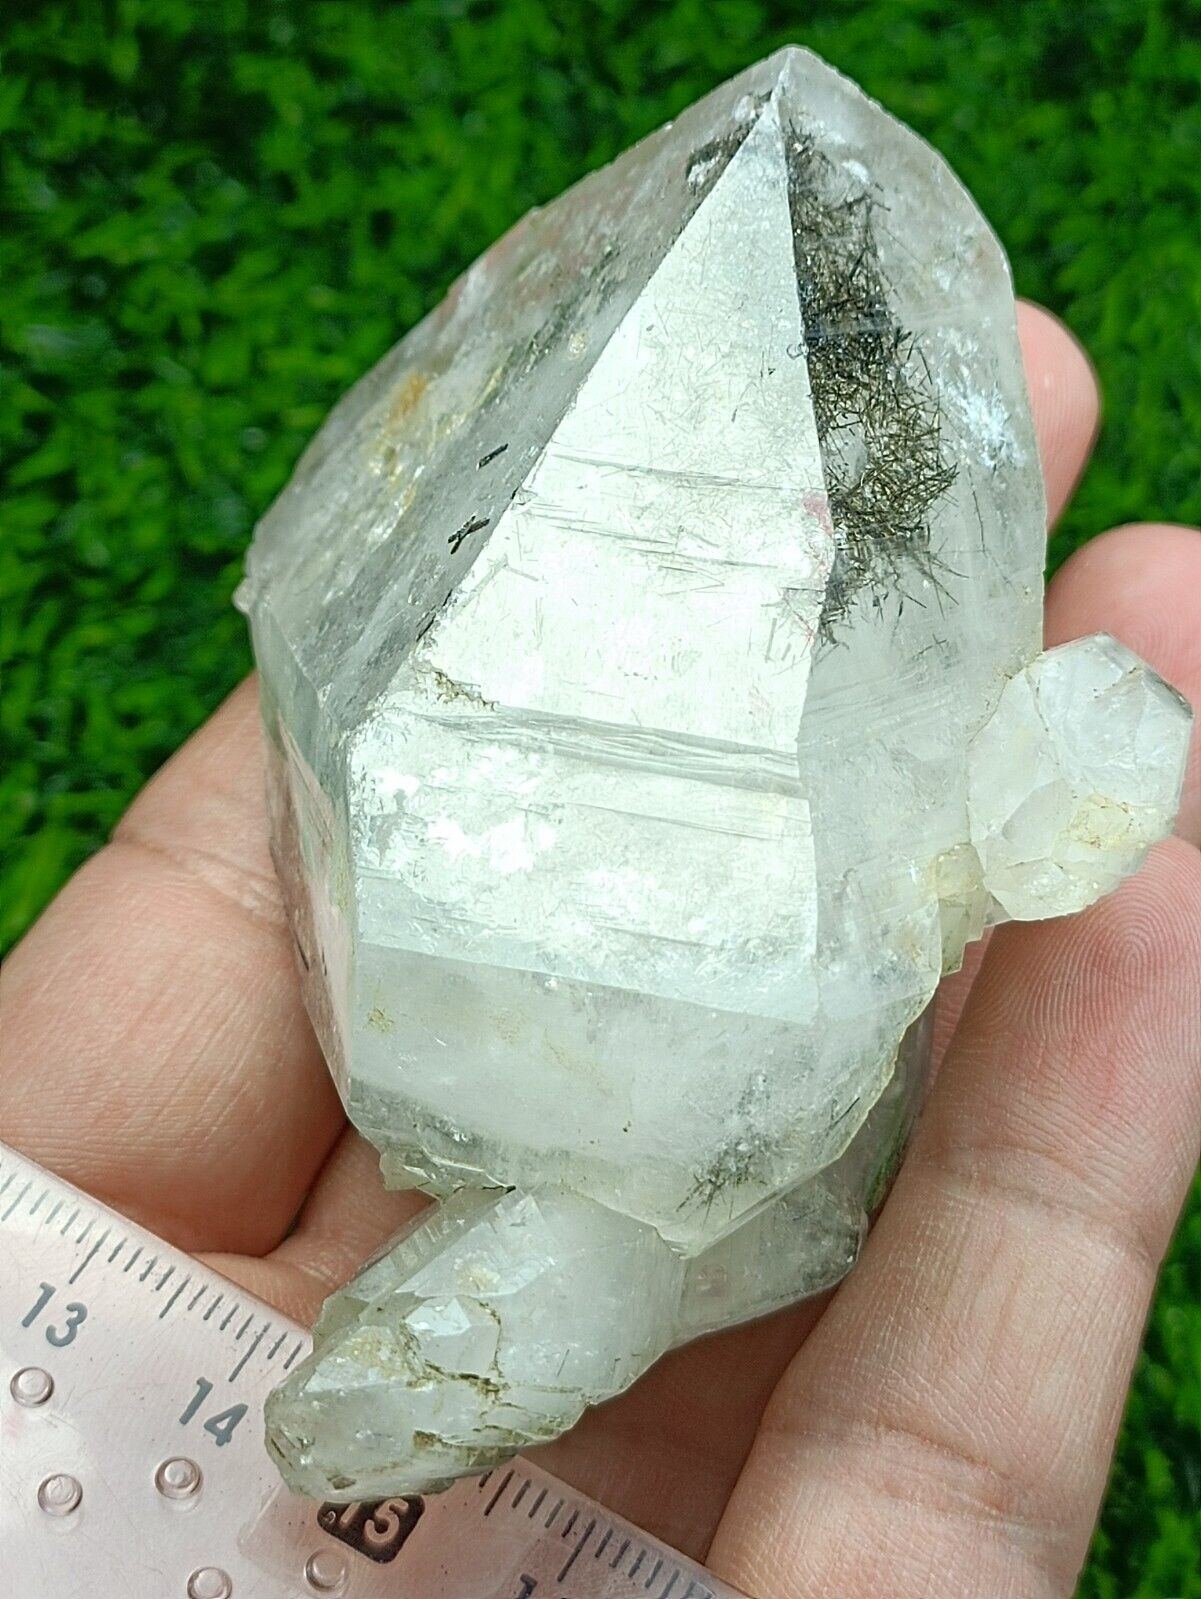 151g Rutile Quartz Scepter/Crystal (tourmalinated) with very unique formation 